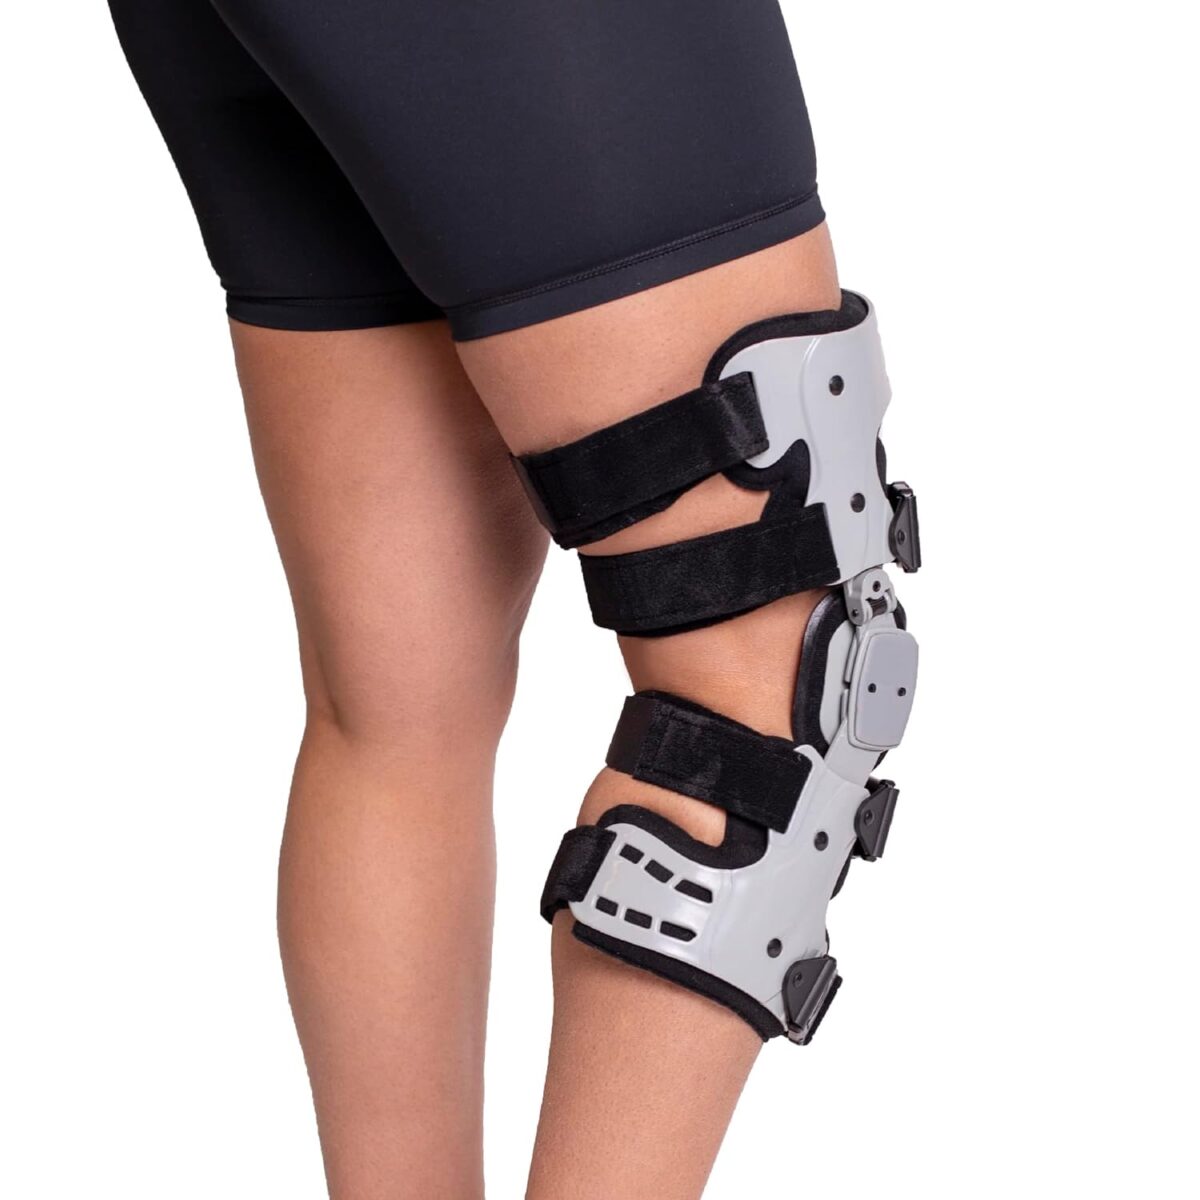 Featured Image for Brace Align Osteoarthritis Unloader Knee Brace for Knee Pain, Arthritis Pain Relief – Medial or Lateral – For Men and Women – L1843/L1851